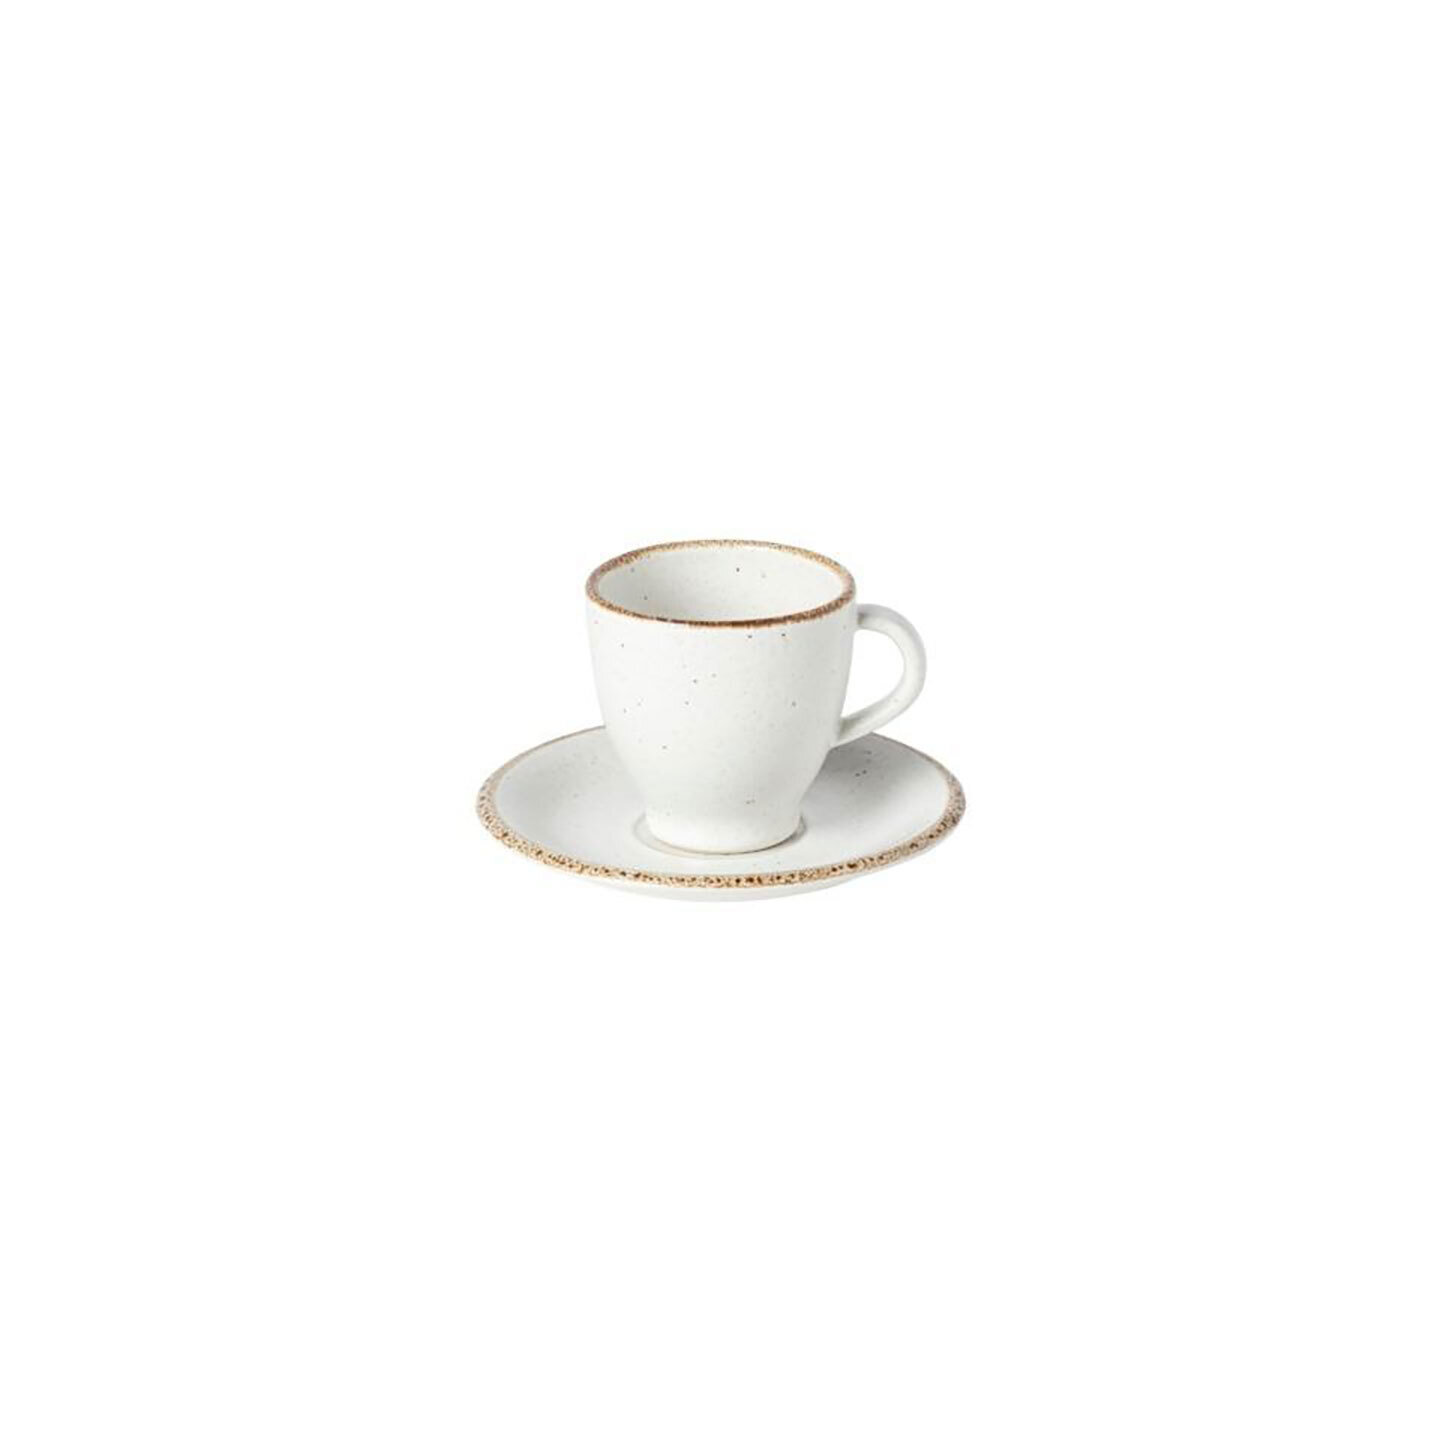 Casafina Positano White Coffee Cup Saucer 3 Oz XCCS02-WHI Set of 6